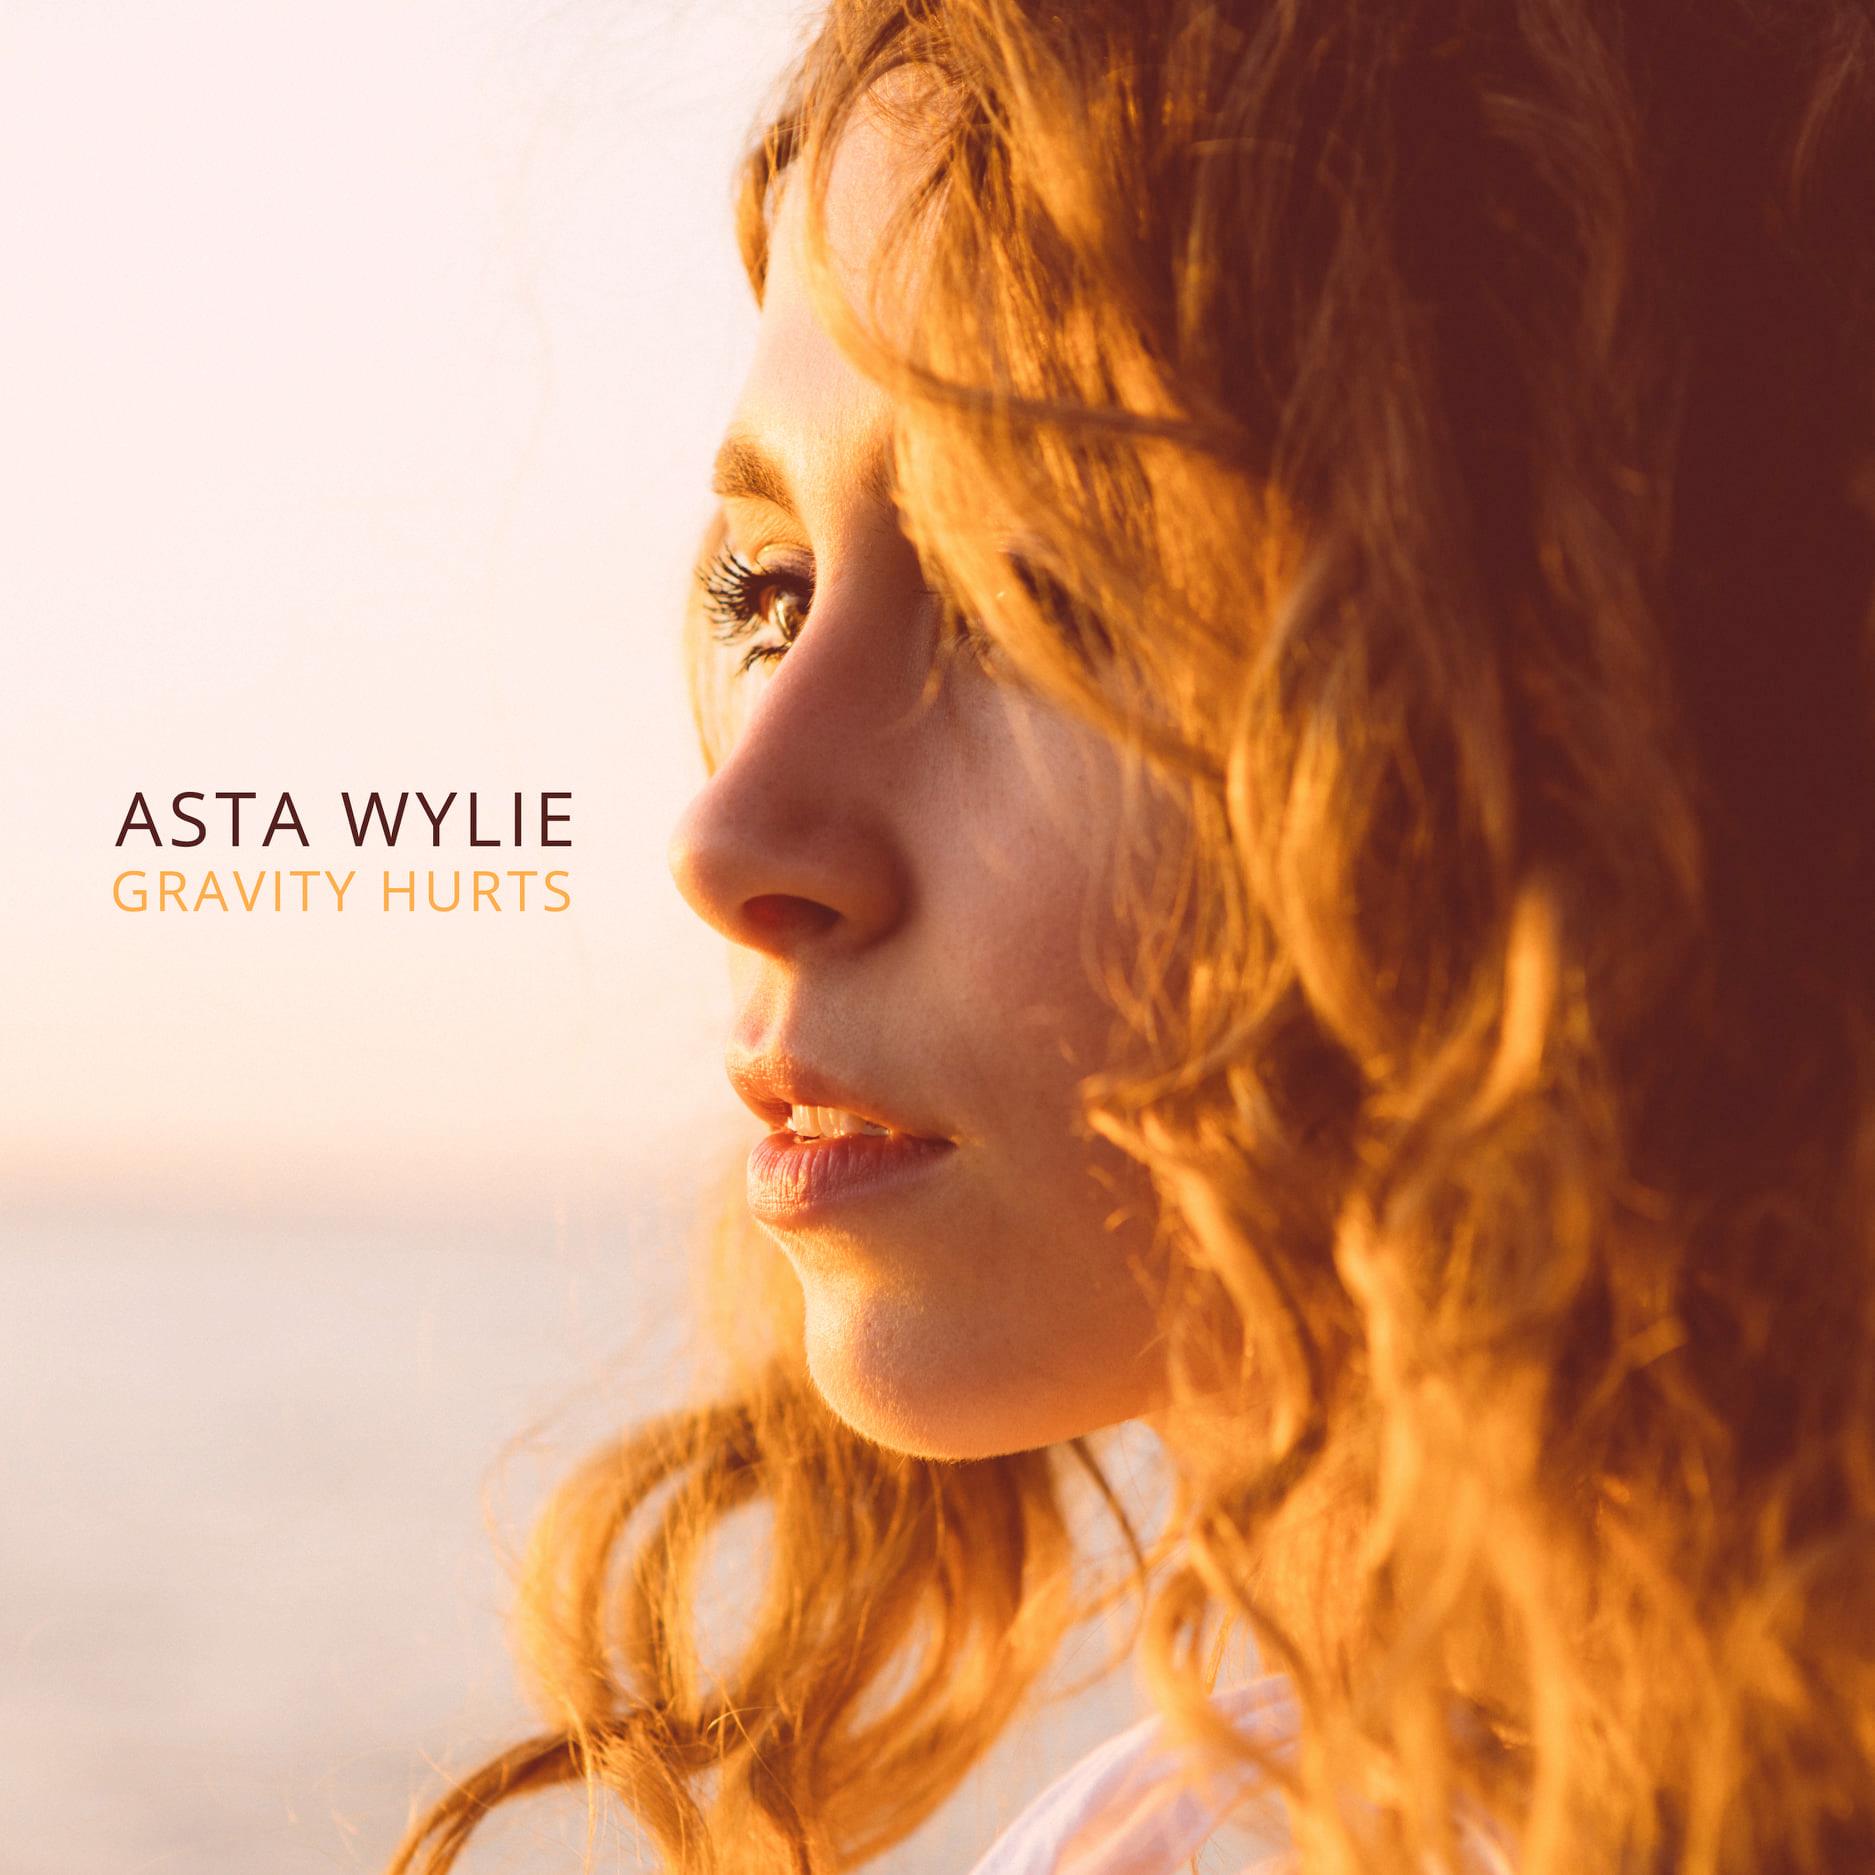 Asta Wylie releases her debut album, “Gravity Hurts”